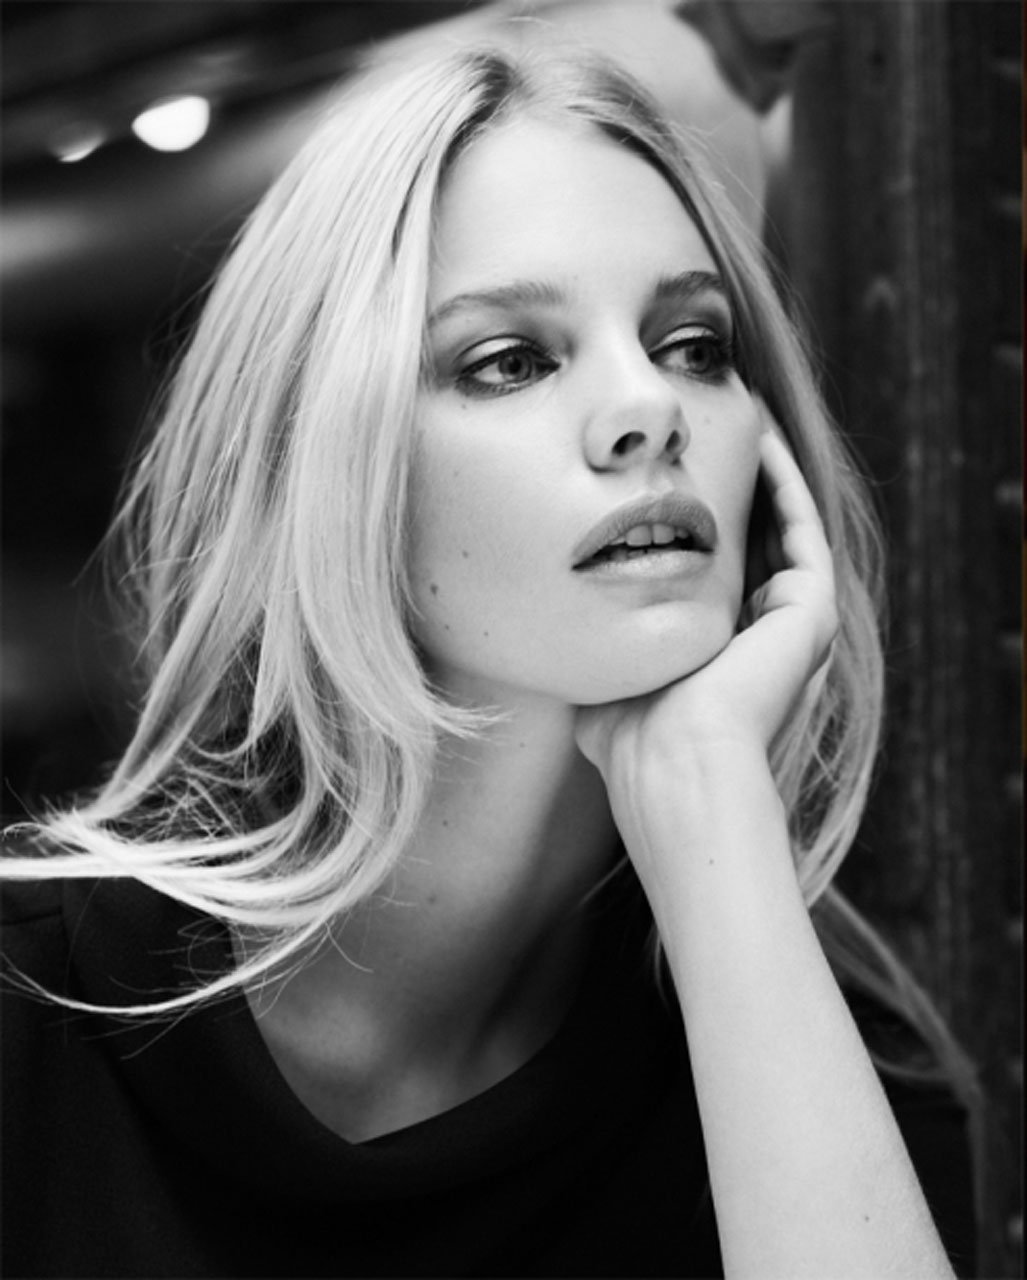   MARLOES HORST